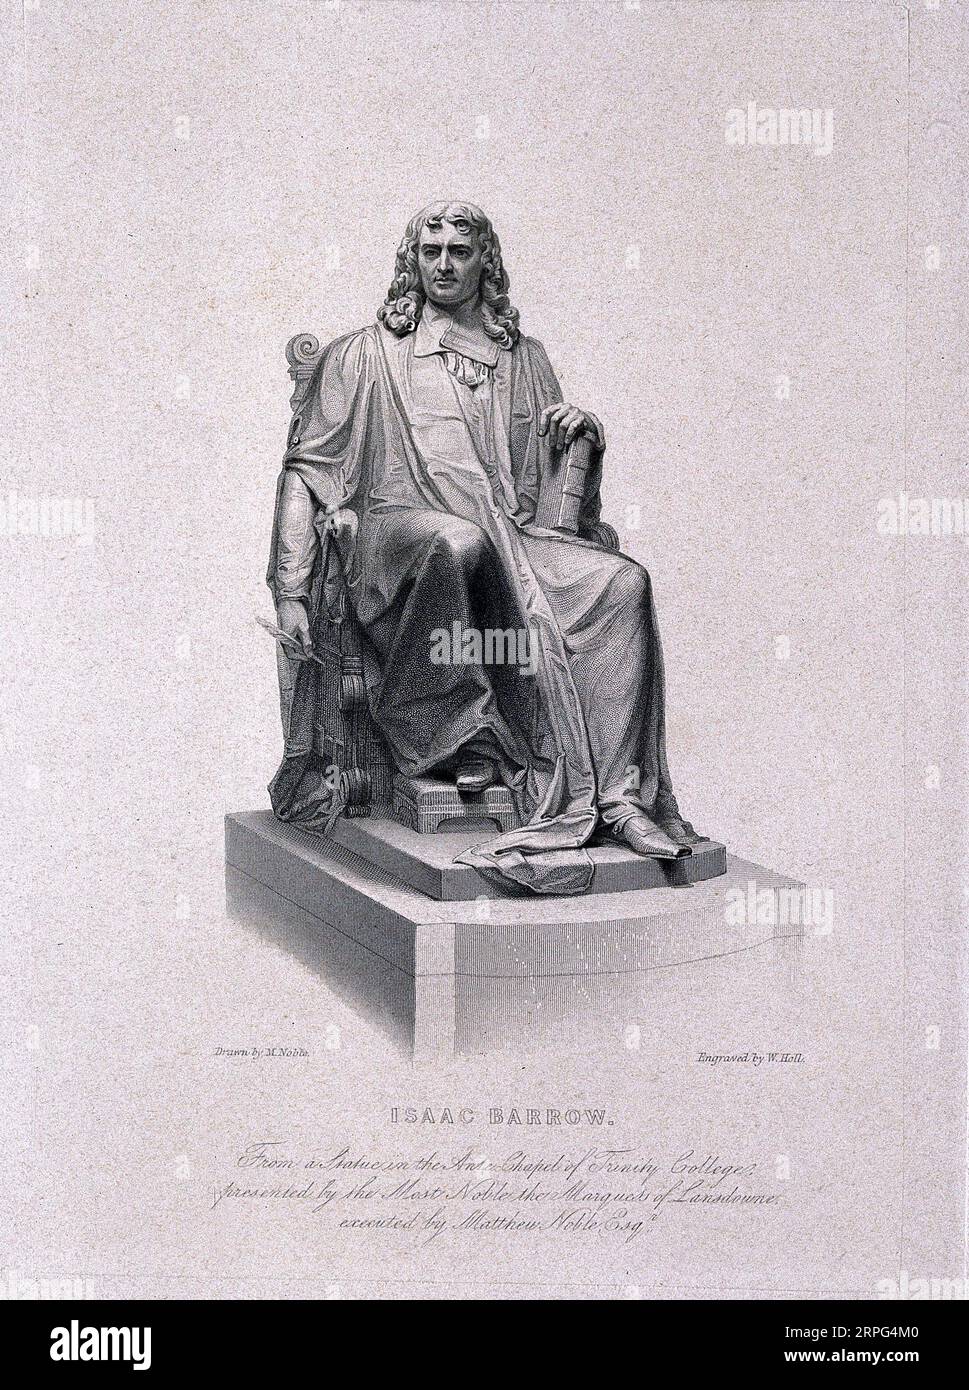 Isaac Barrow statue, 1630 – 1677, was an English Christian theologian and mathematician known for his early role in infinitesimal calculus, he was also the first holder of the Lucasian Professorship of Mathematics at Cambridge University, stipple engraving by W. Holl after Matthew Noble. Stock Photo